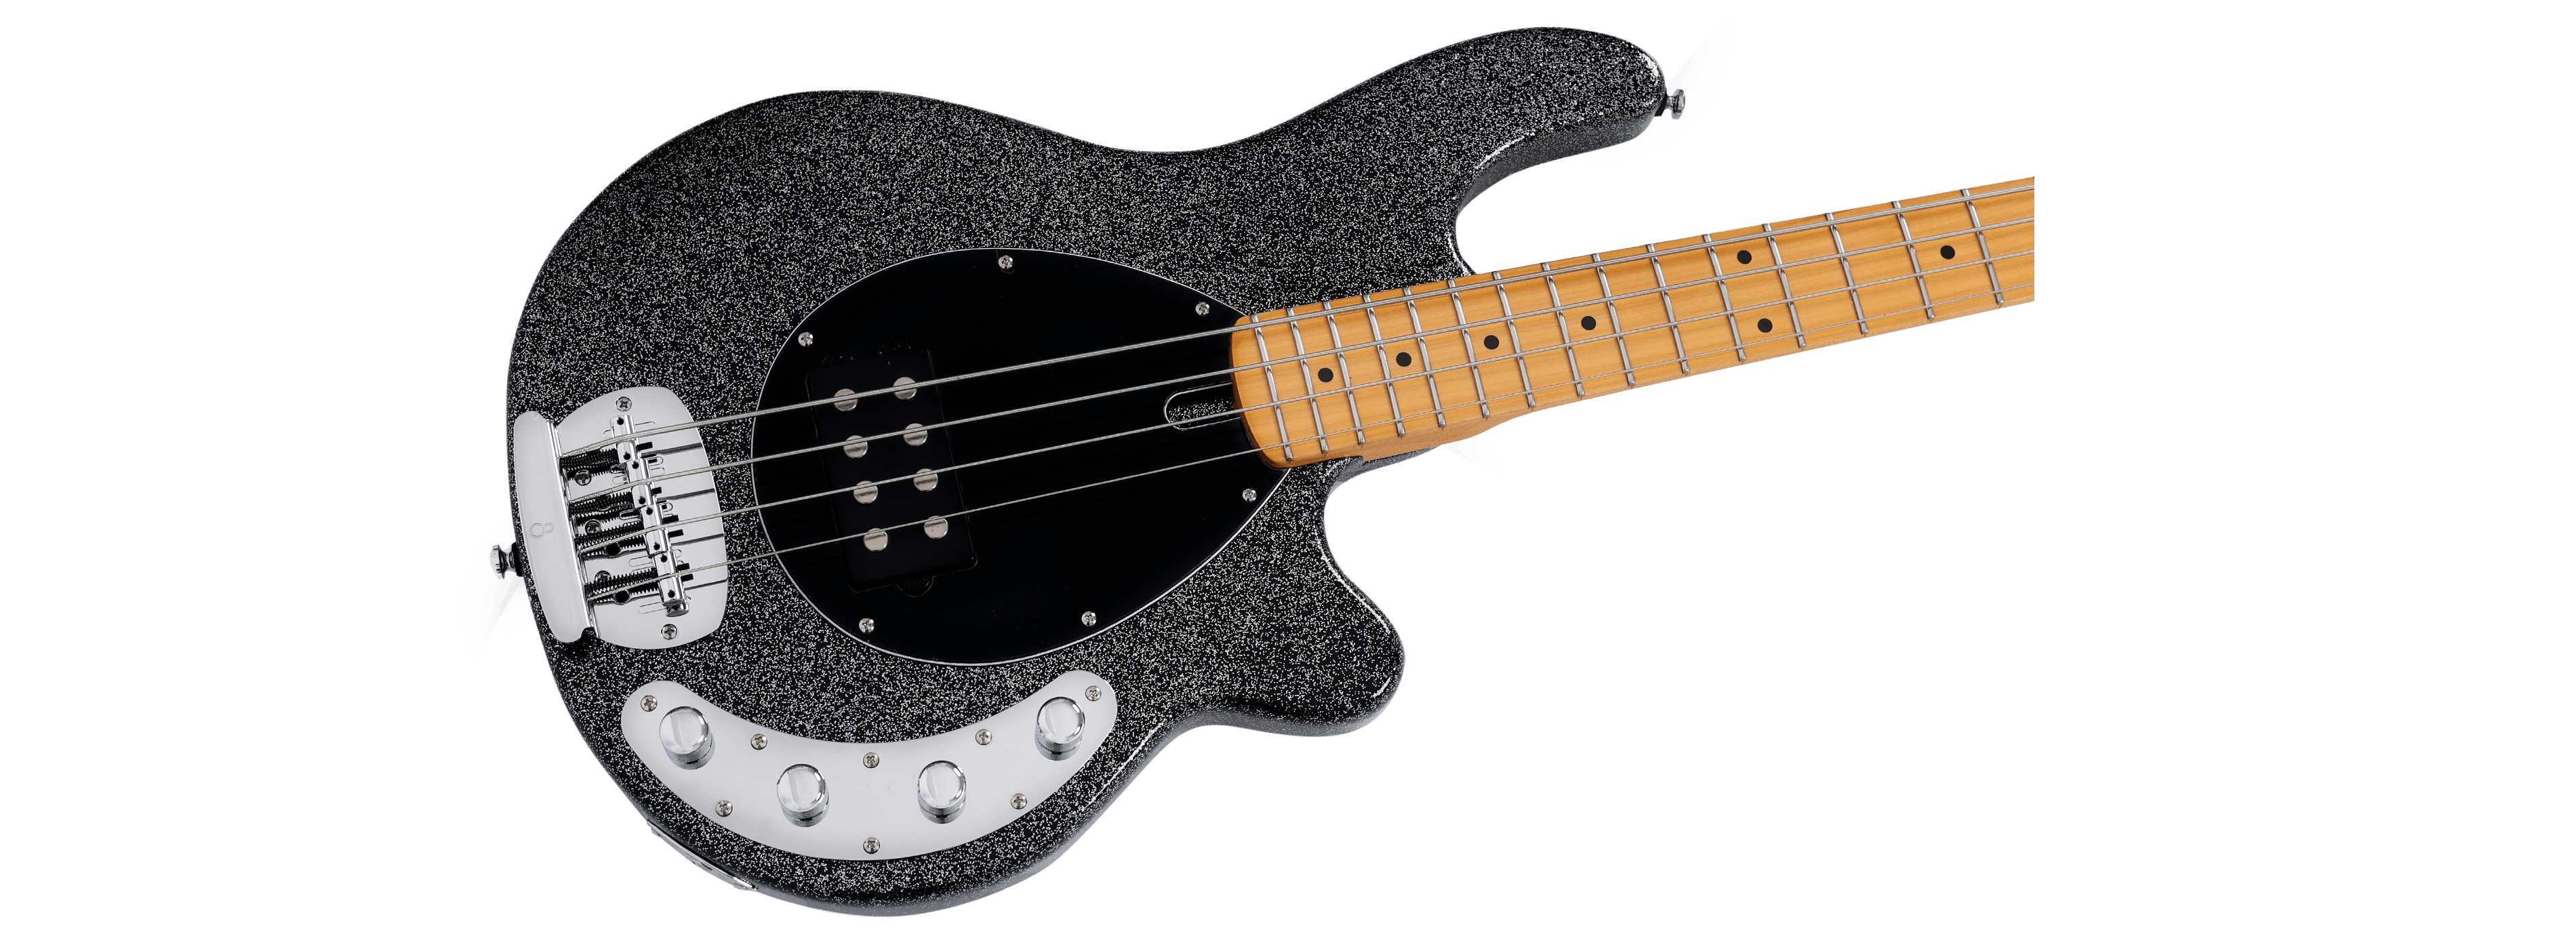 Sire Marcus Miller Z3 4 String Bass in Sparkle Black - Andertons Music Co.